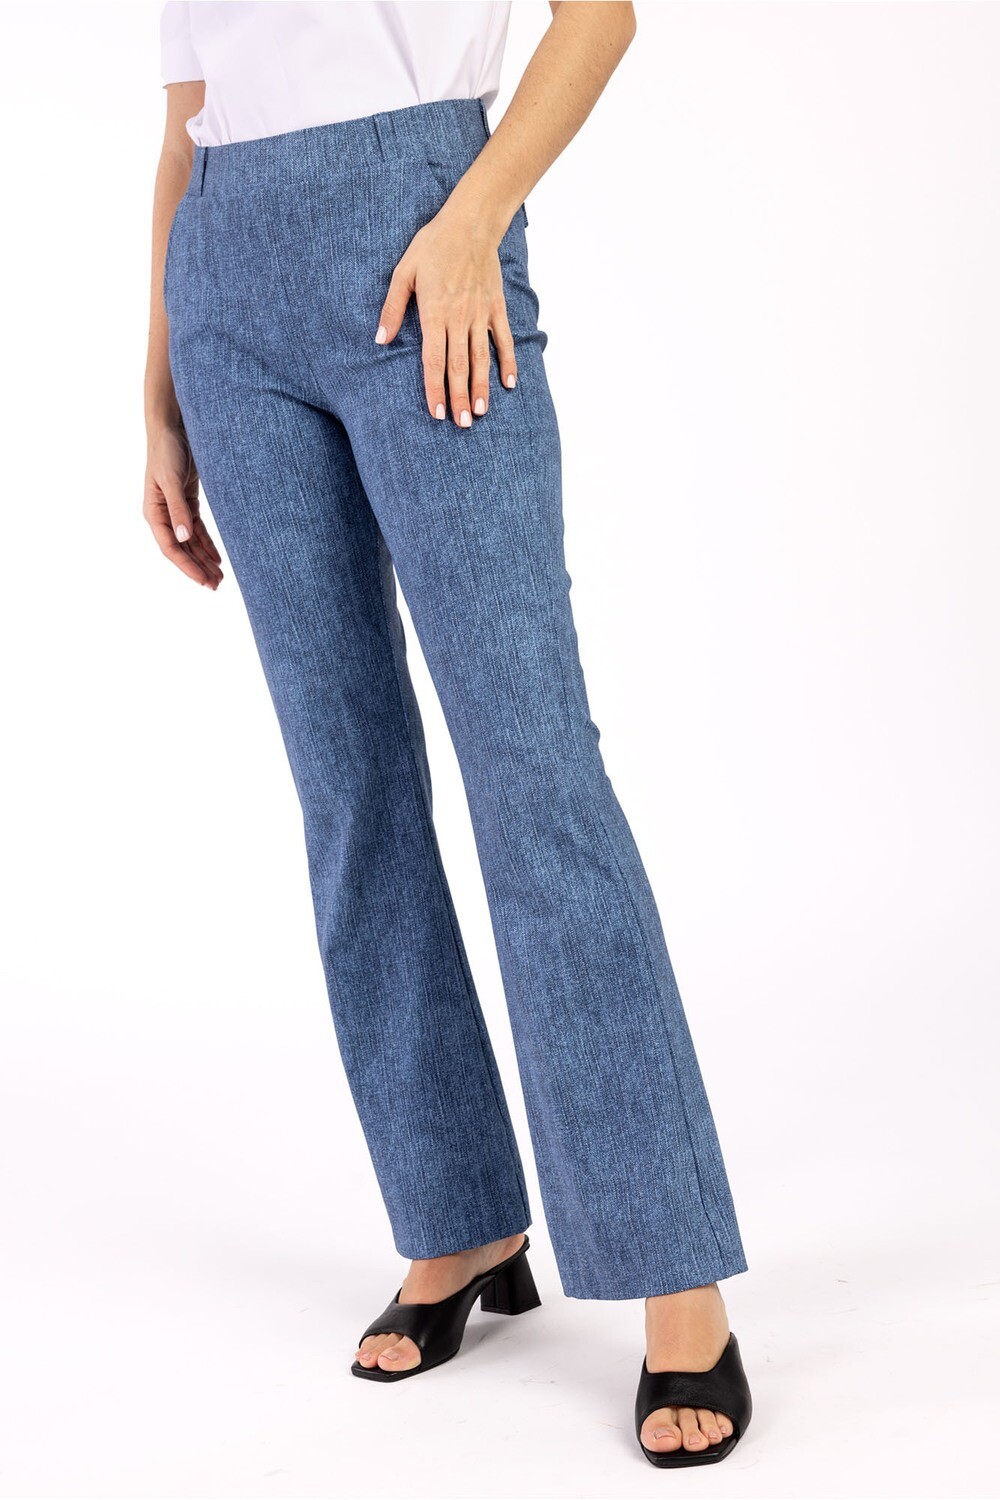 Studio Annenloes Flair jeans trousers, blauw